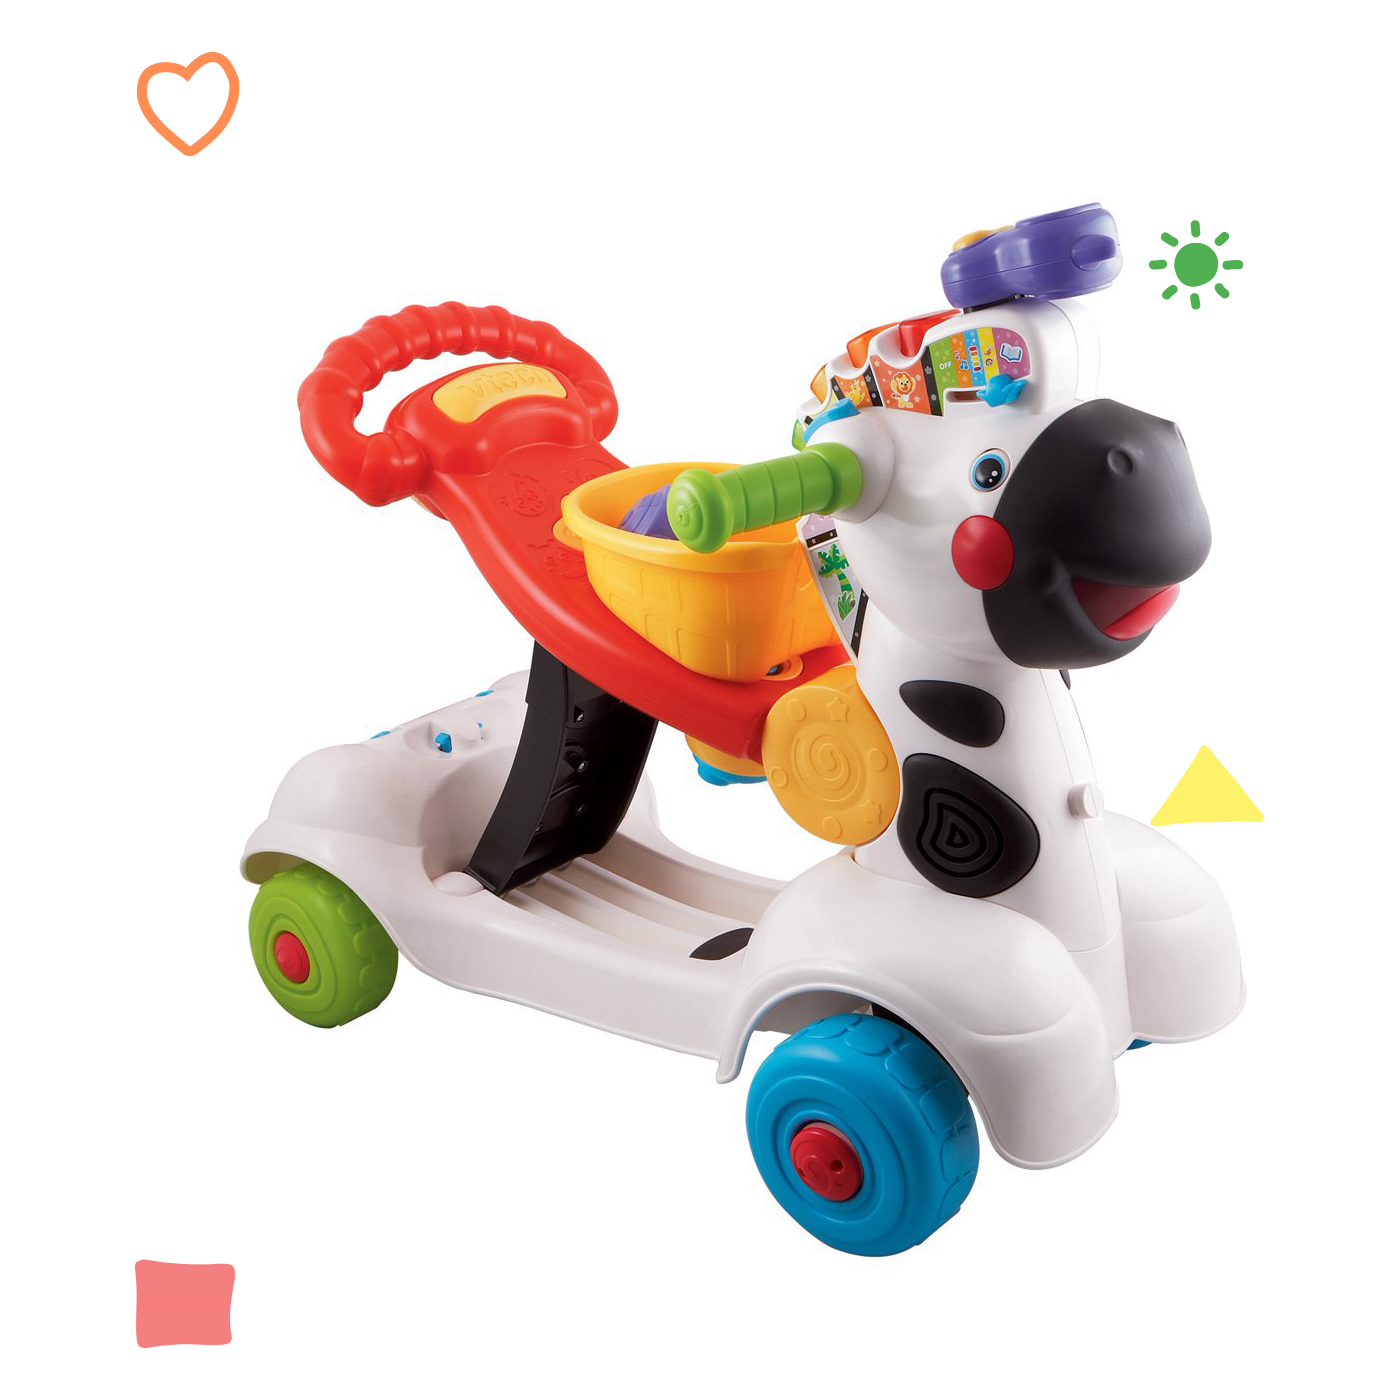 VTech 3 In 1 Zebra Scooter, toy box club, ride on scooter, toy box club, cow ride on scooter